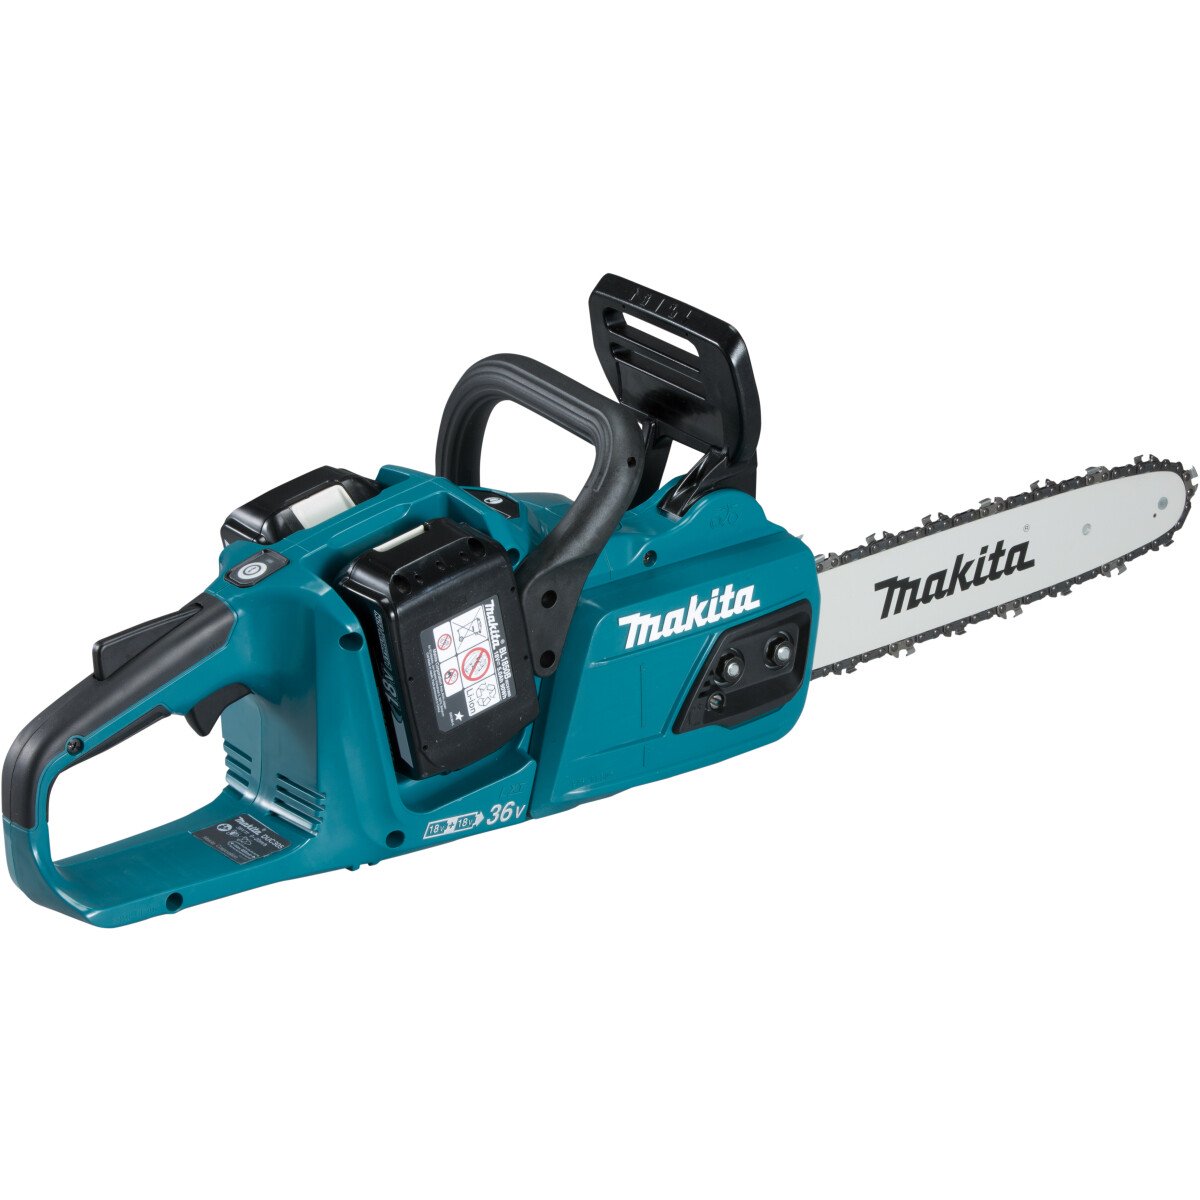 Makita DUC305PG2 Twin 18V Chainsaw 30cm with 2 x 6.0Ah Batteries